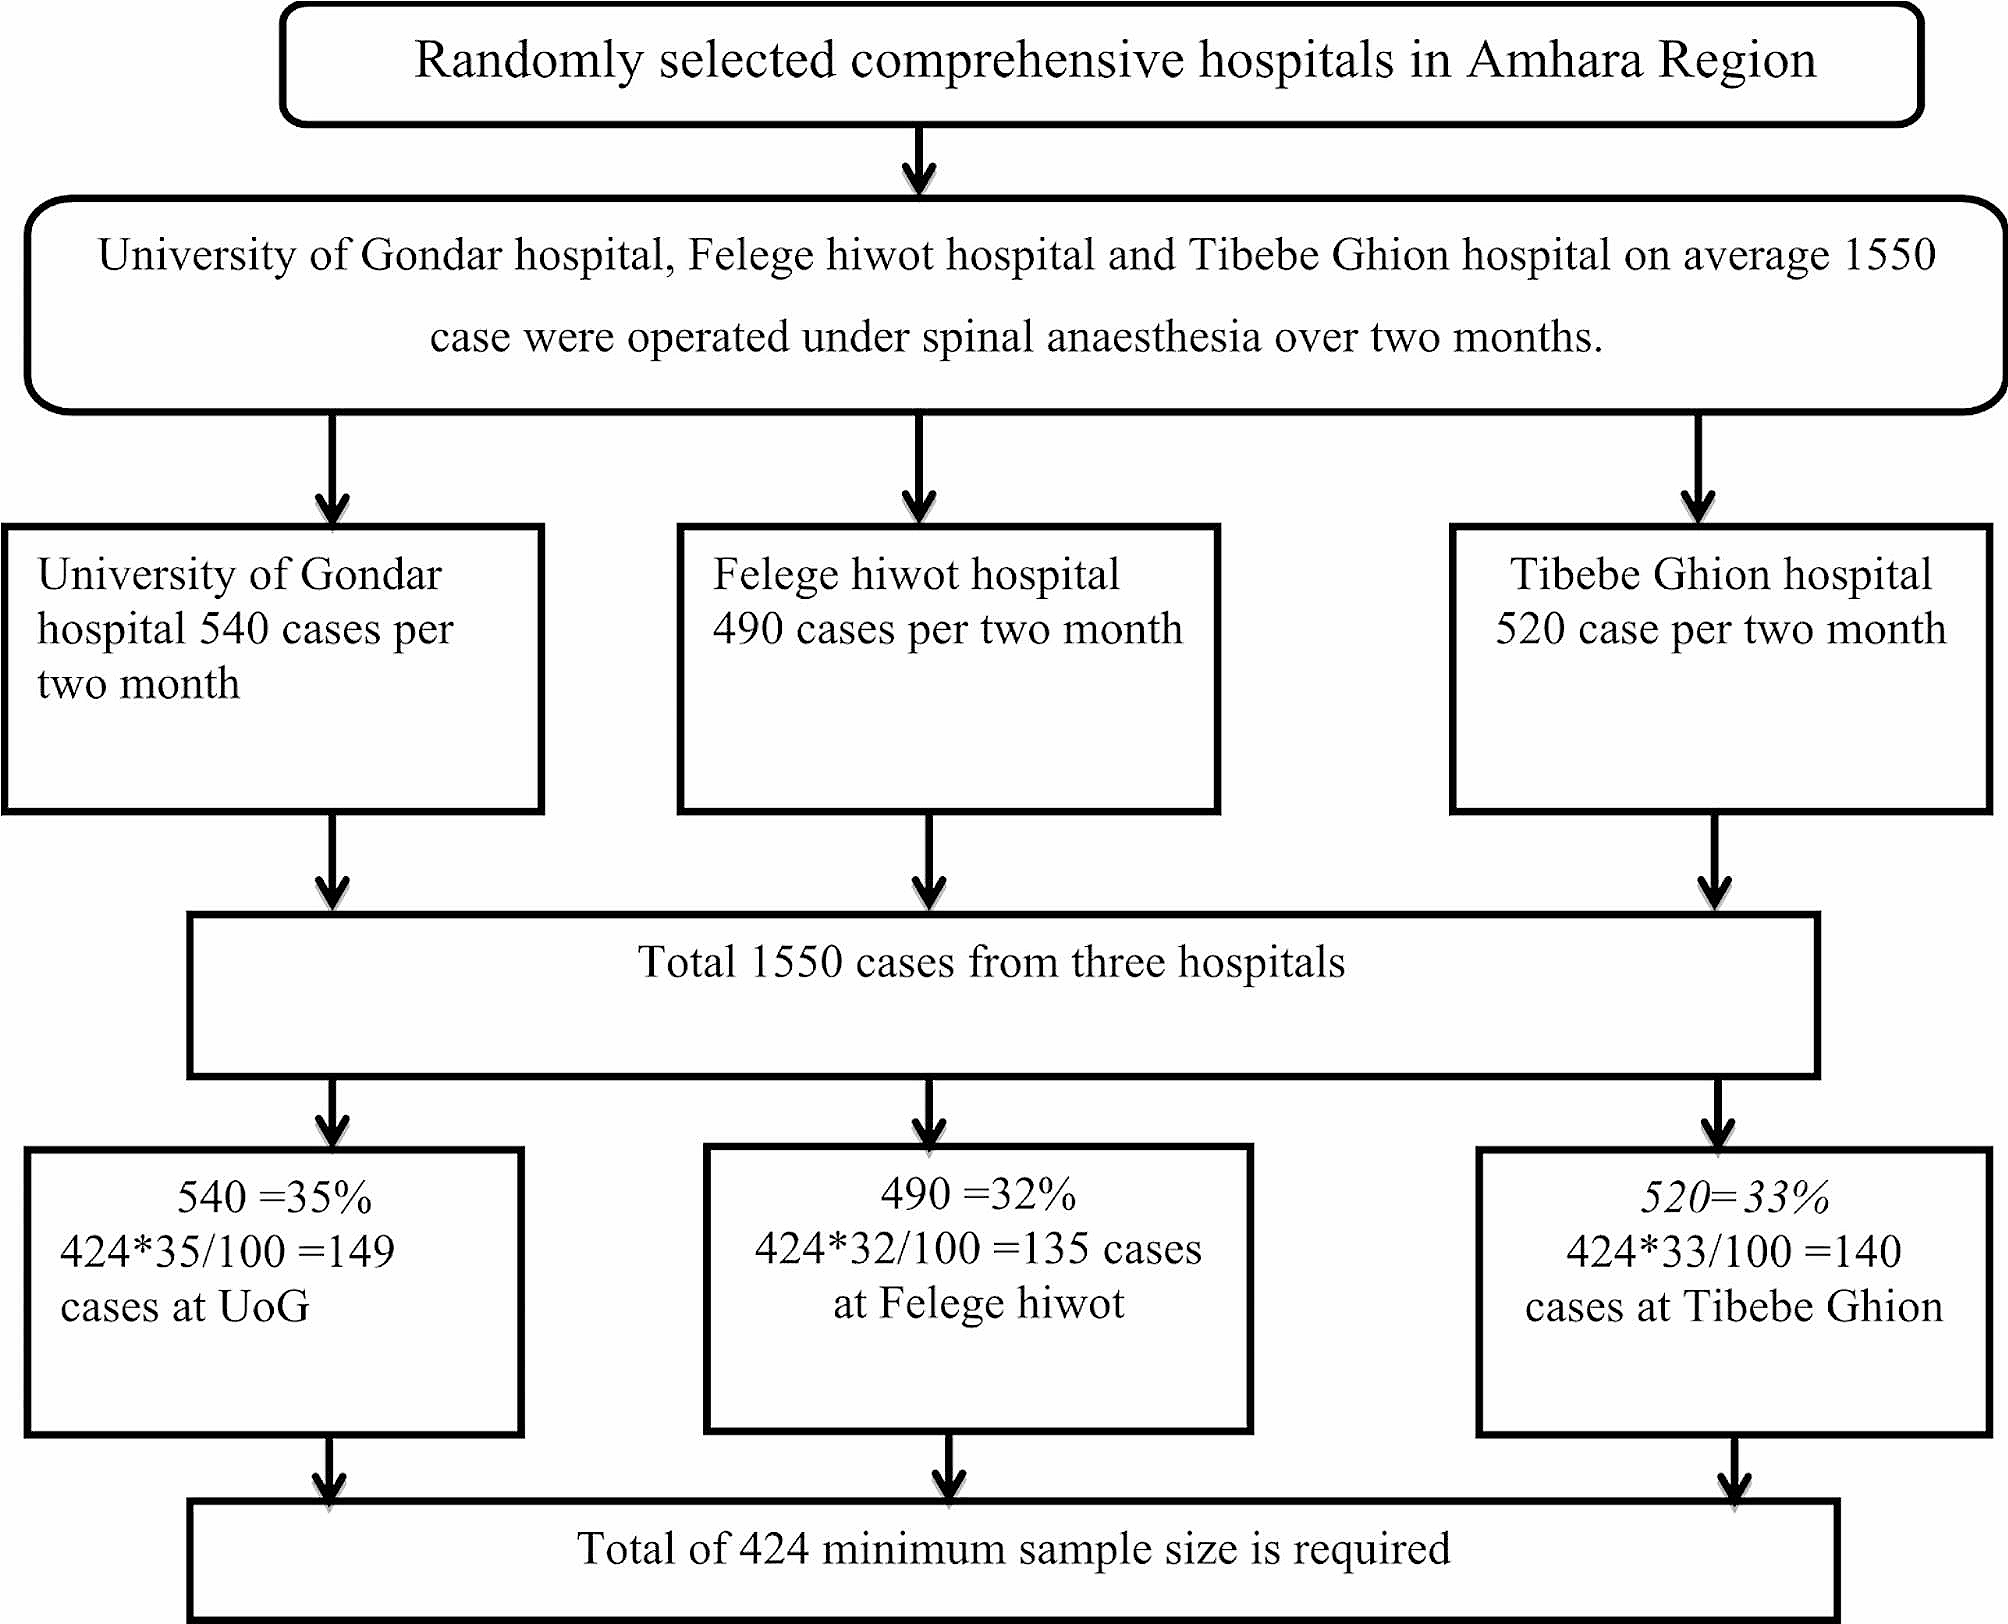 Incidence and factors associated with failed spinal anaesthesia among patients undergoing surgery: a multi- center prospective observational study